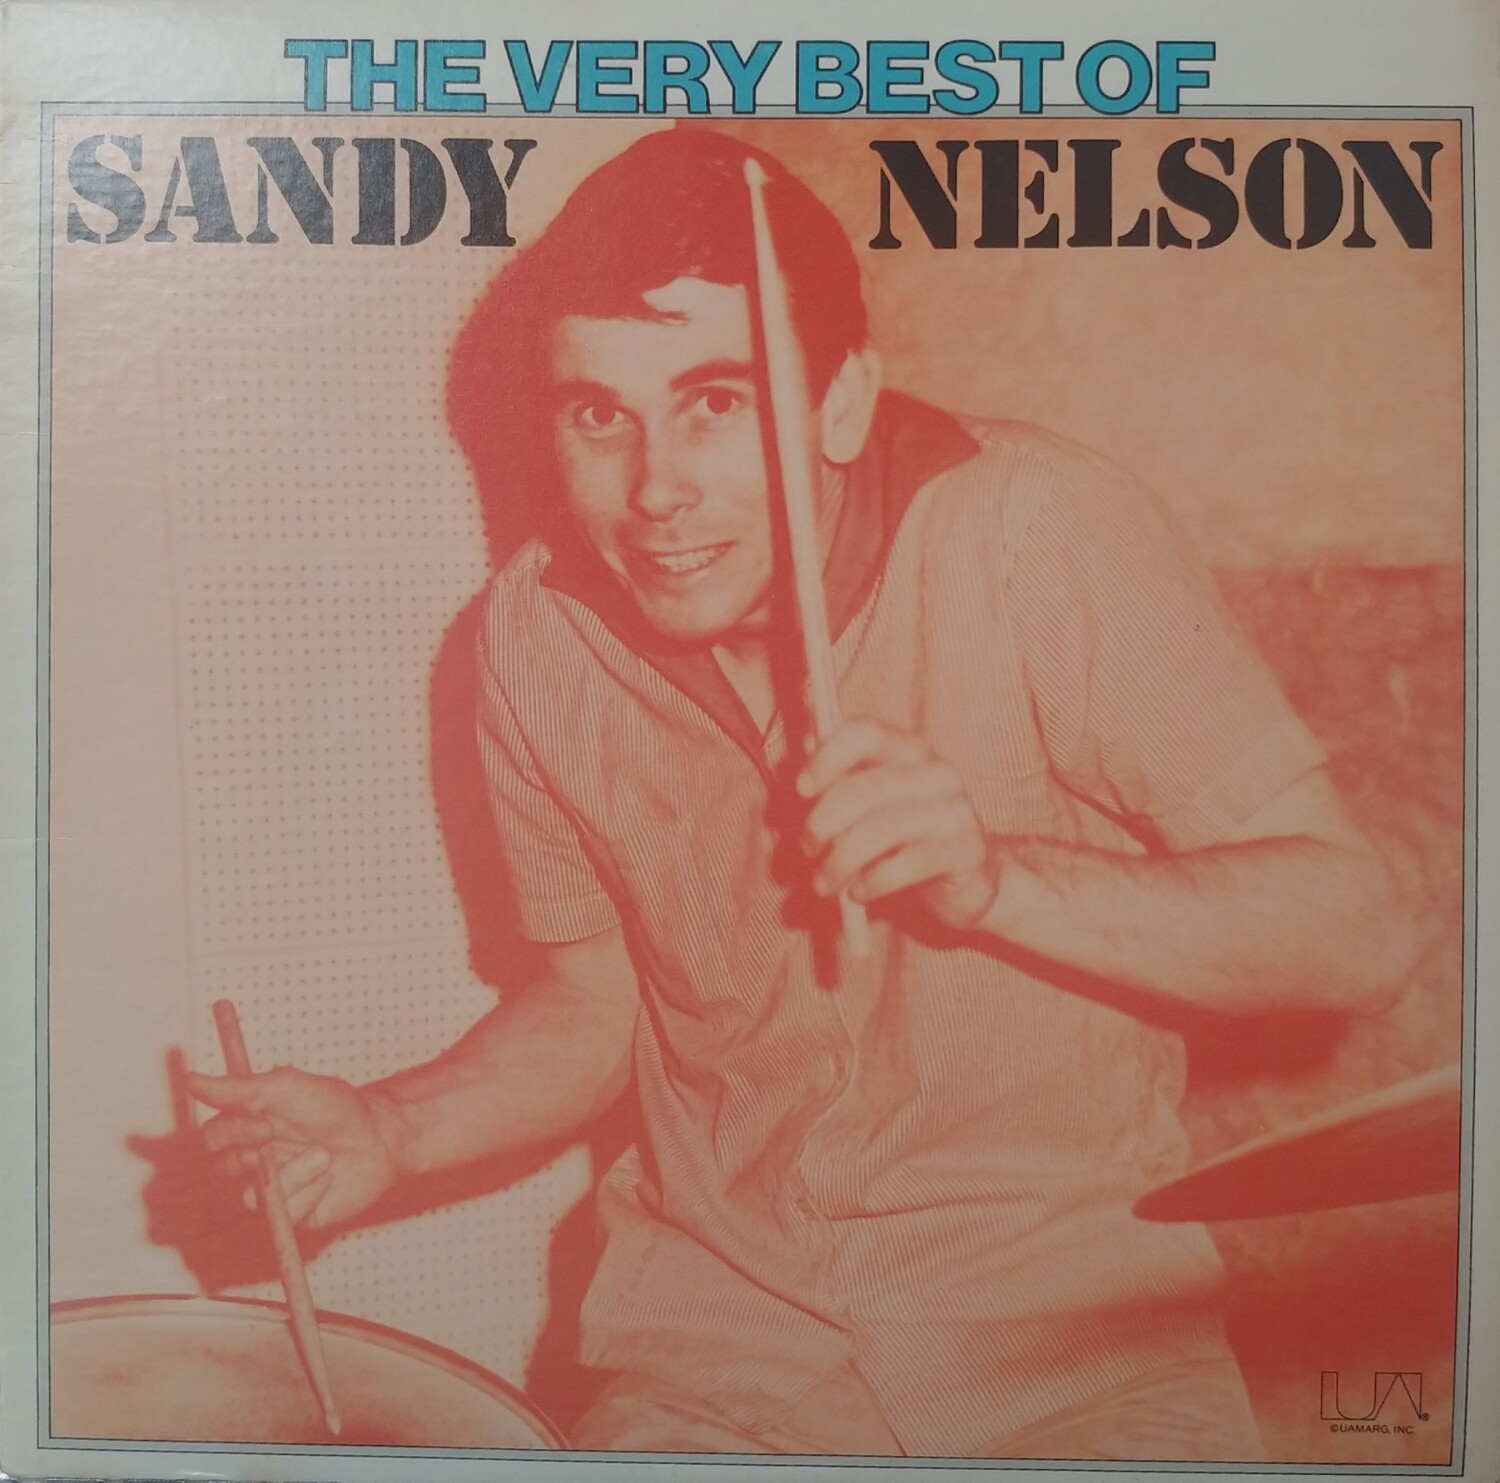 Sandy Nelson - The very best of Sandy Nelson